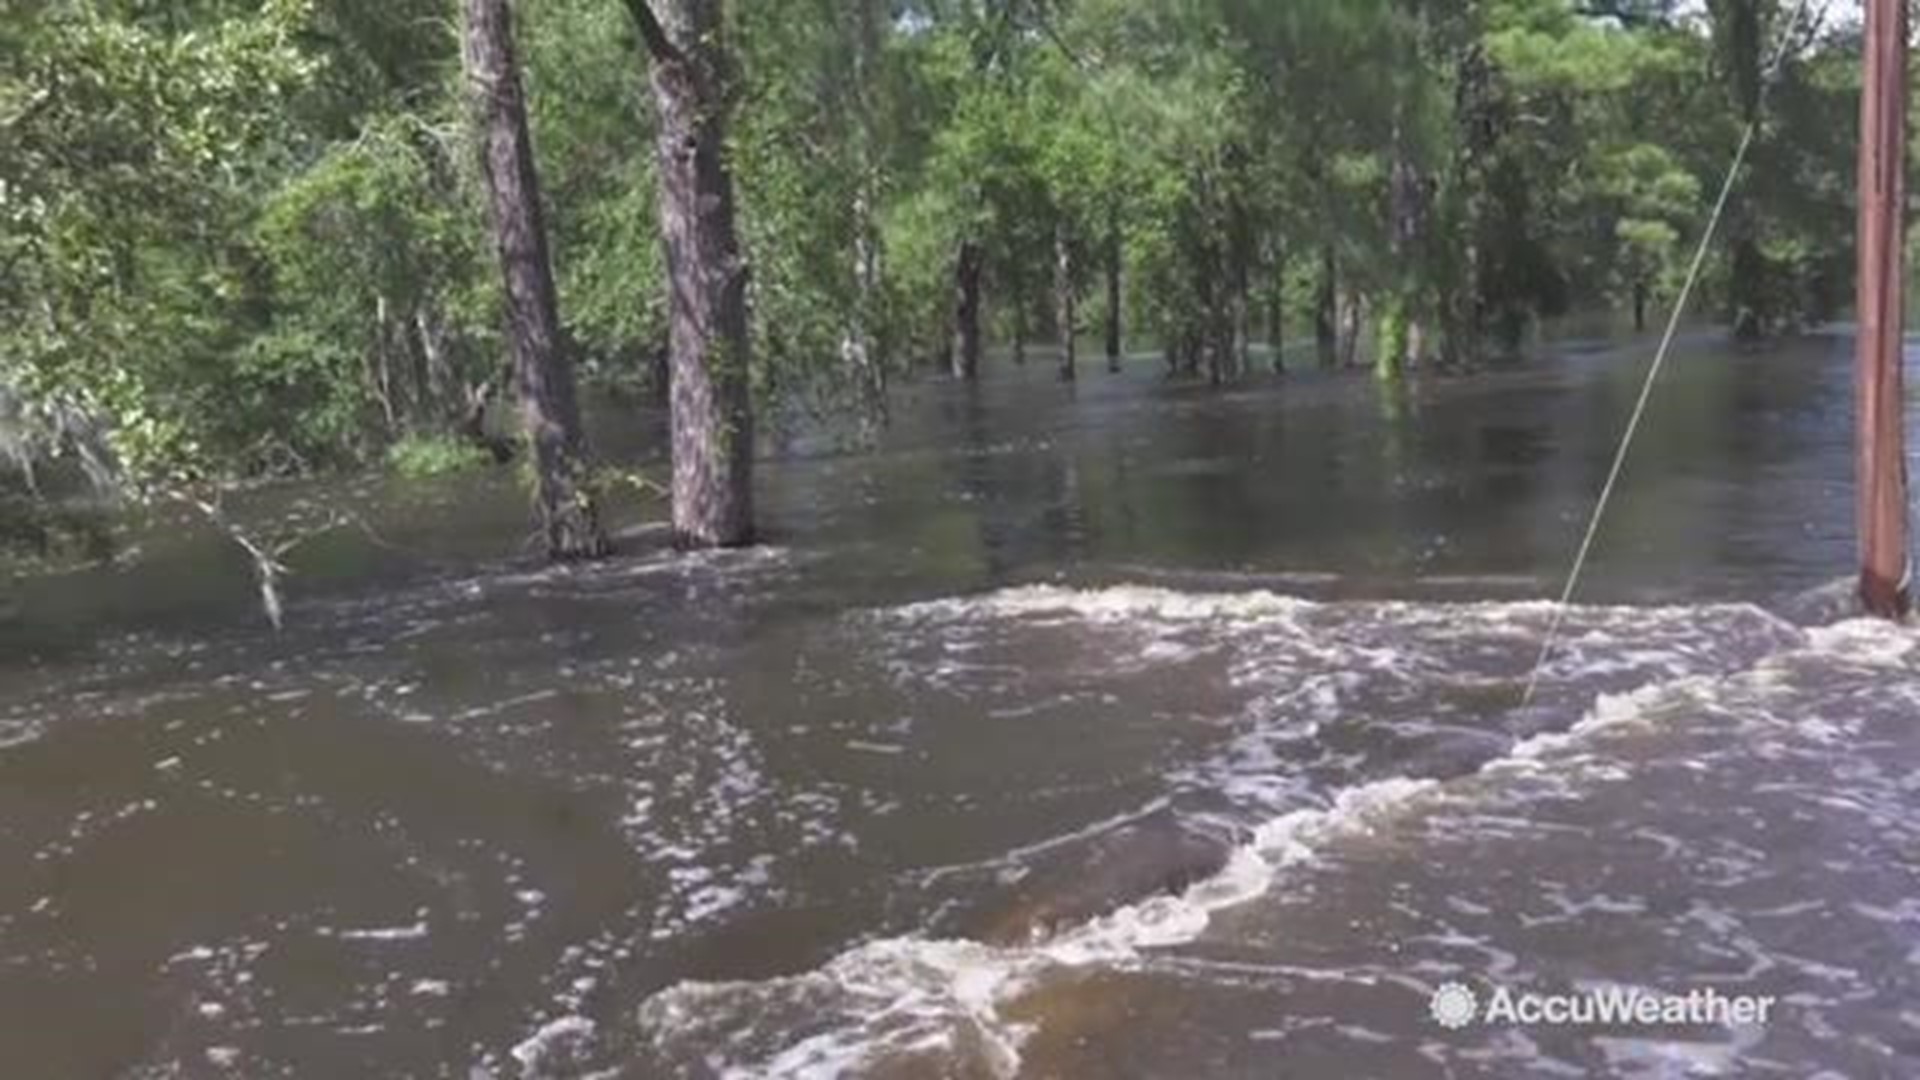 Nearly 2 years after a family's devastating flooding from Hurricane Matthew, they have returned to their South Carolina home to once again, find it surrounded by floodwaters from Florence.